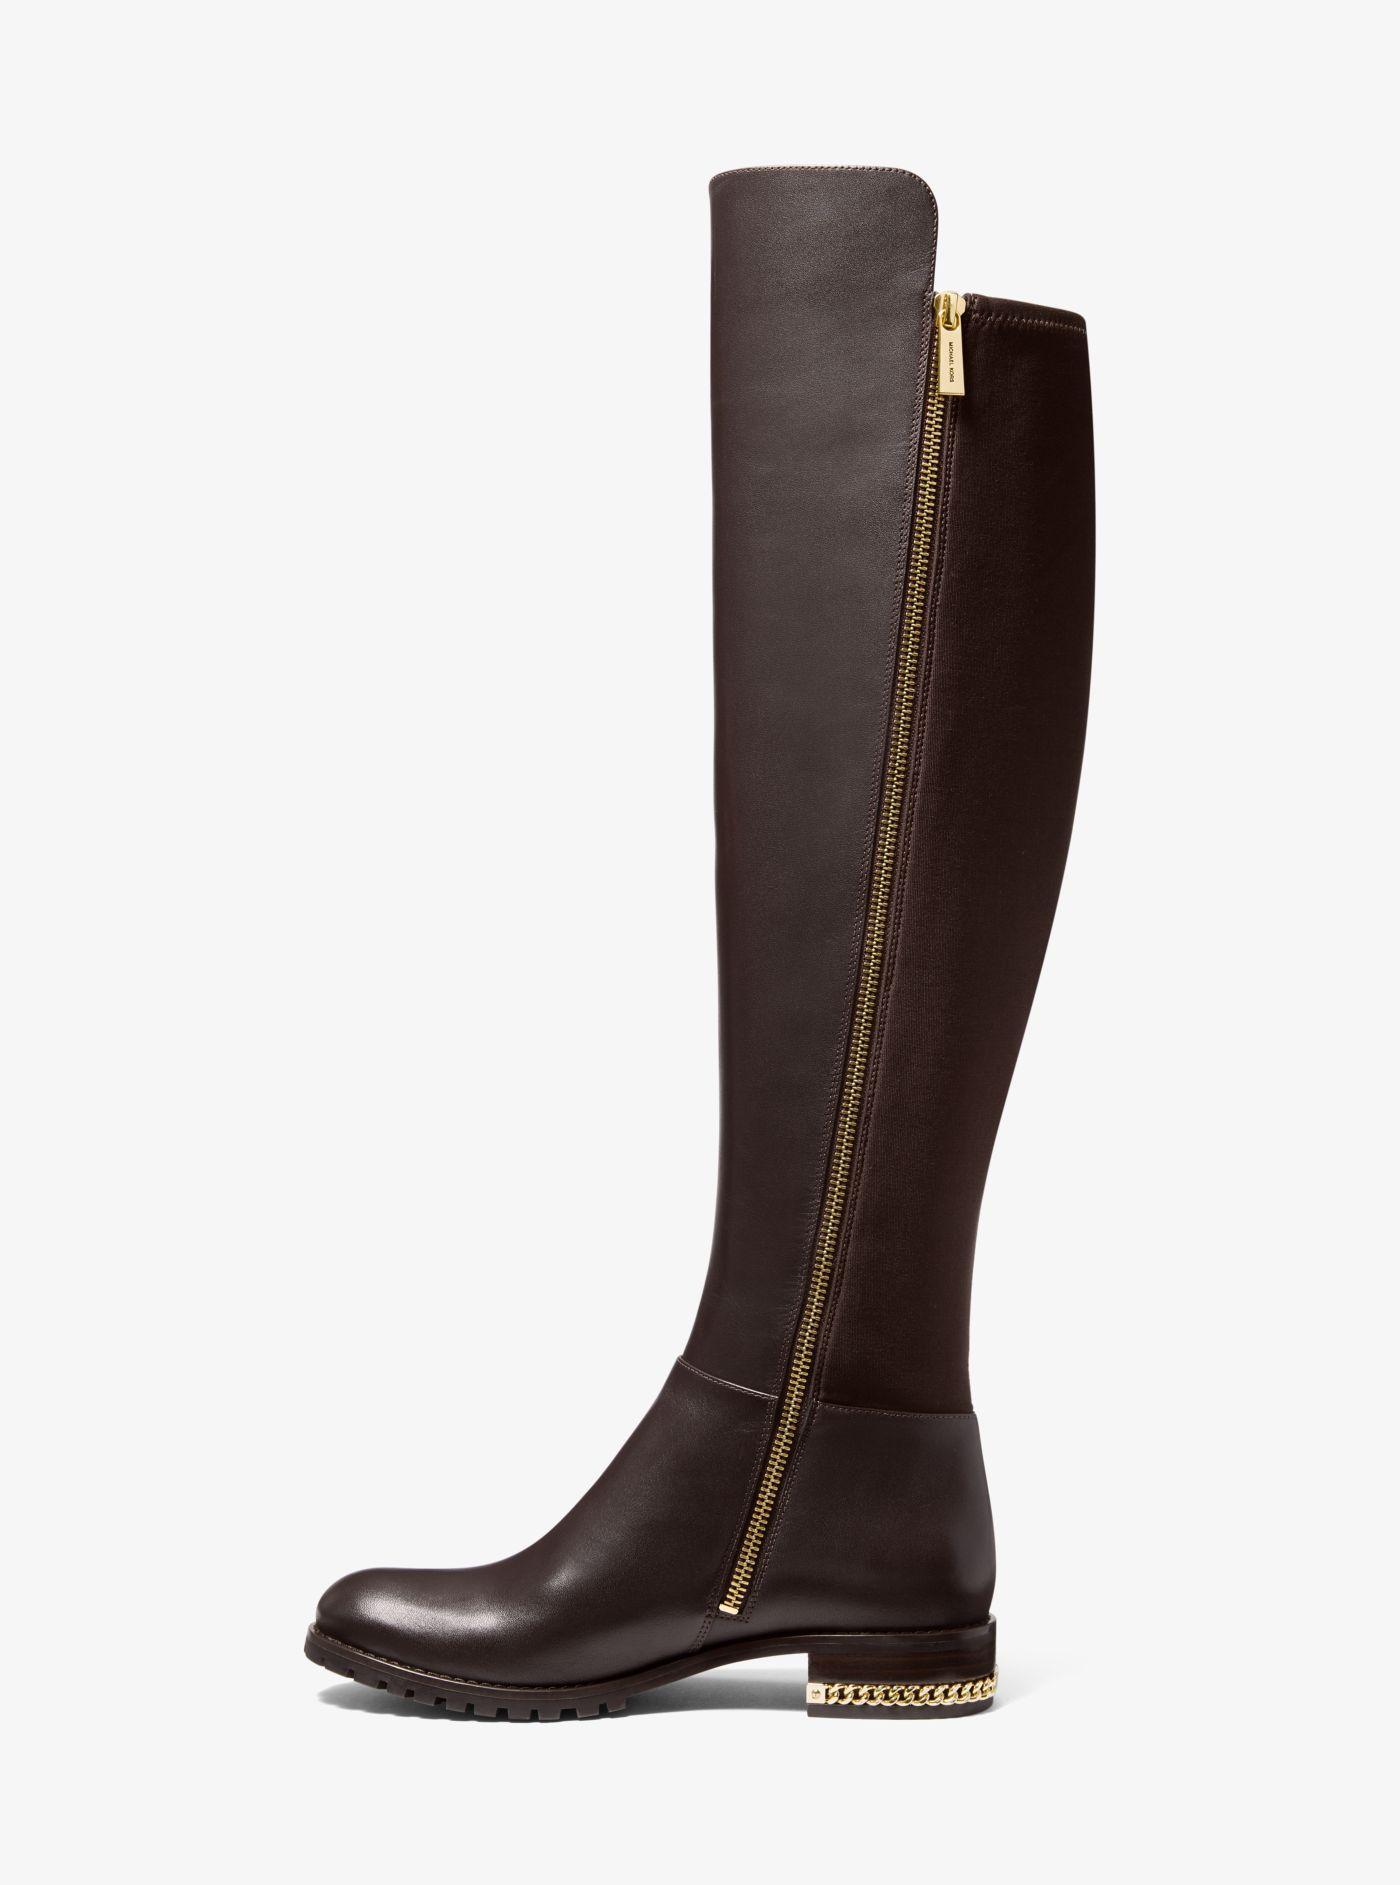 Michael Kors Sabrina Stretch Leather Boot in Chocolate (Brown) - Lyst